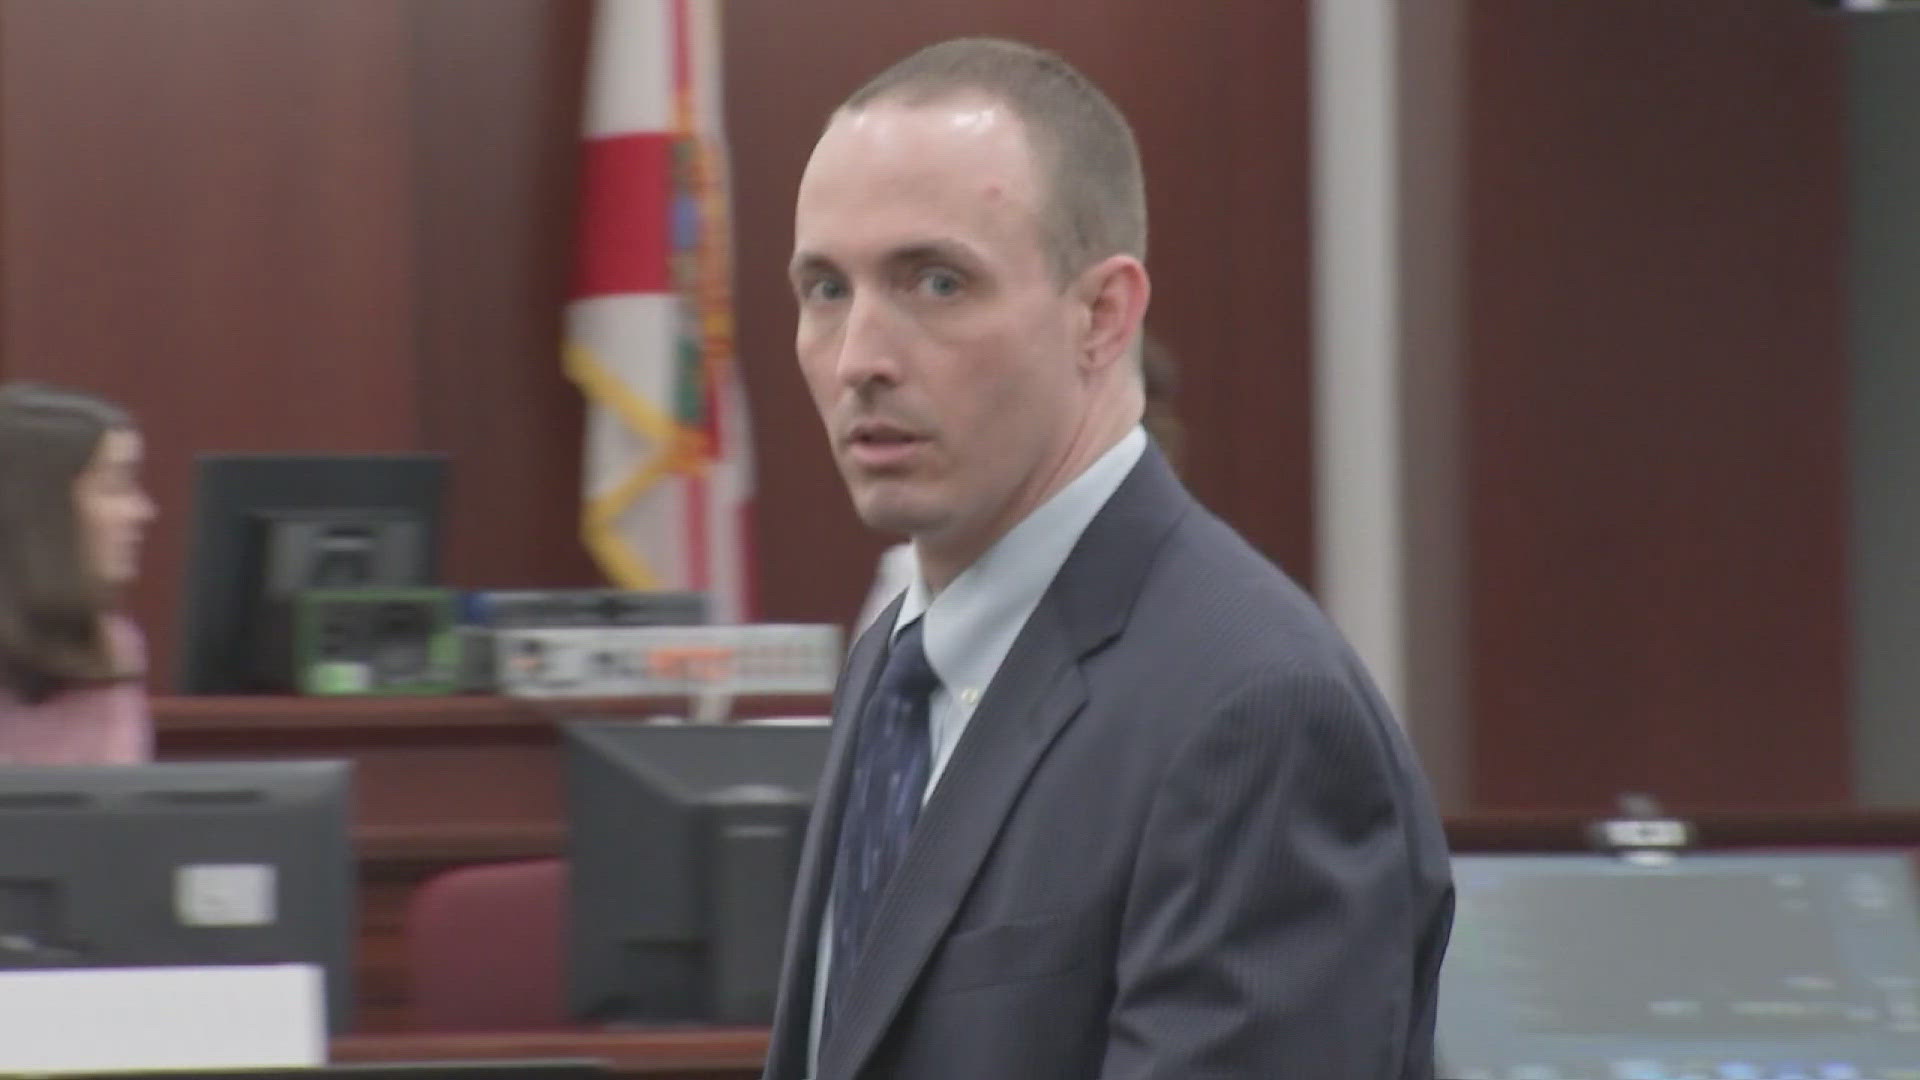 The defense rested their case on Wednesday. After closing arguments, the case will then go to the jury to decide whether Patrick McDowell lives.